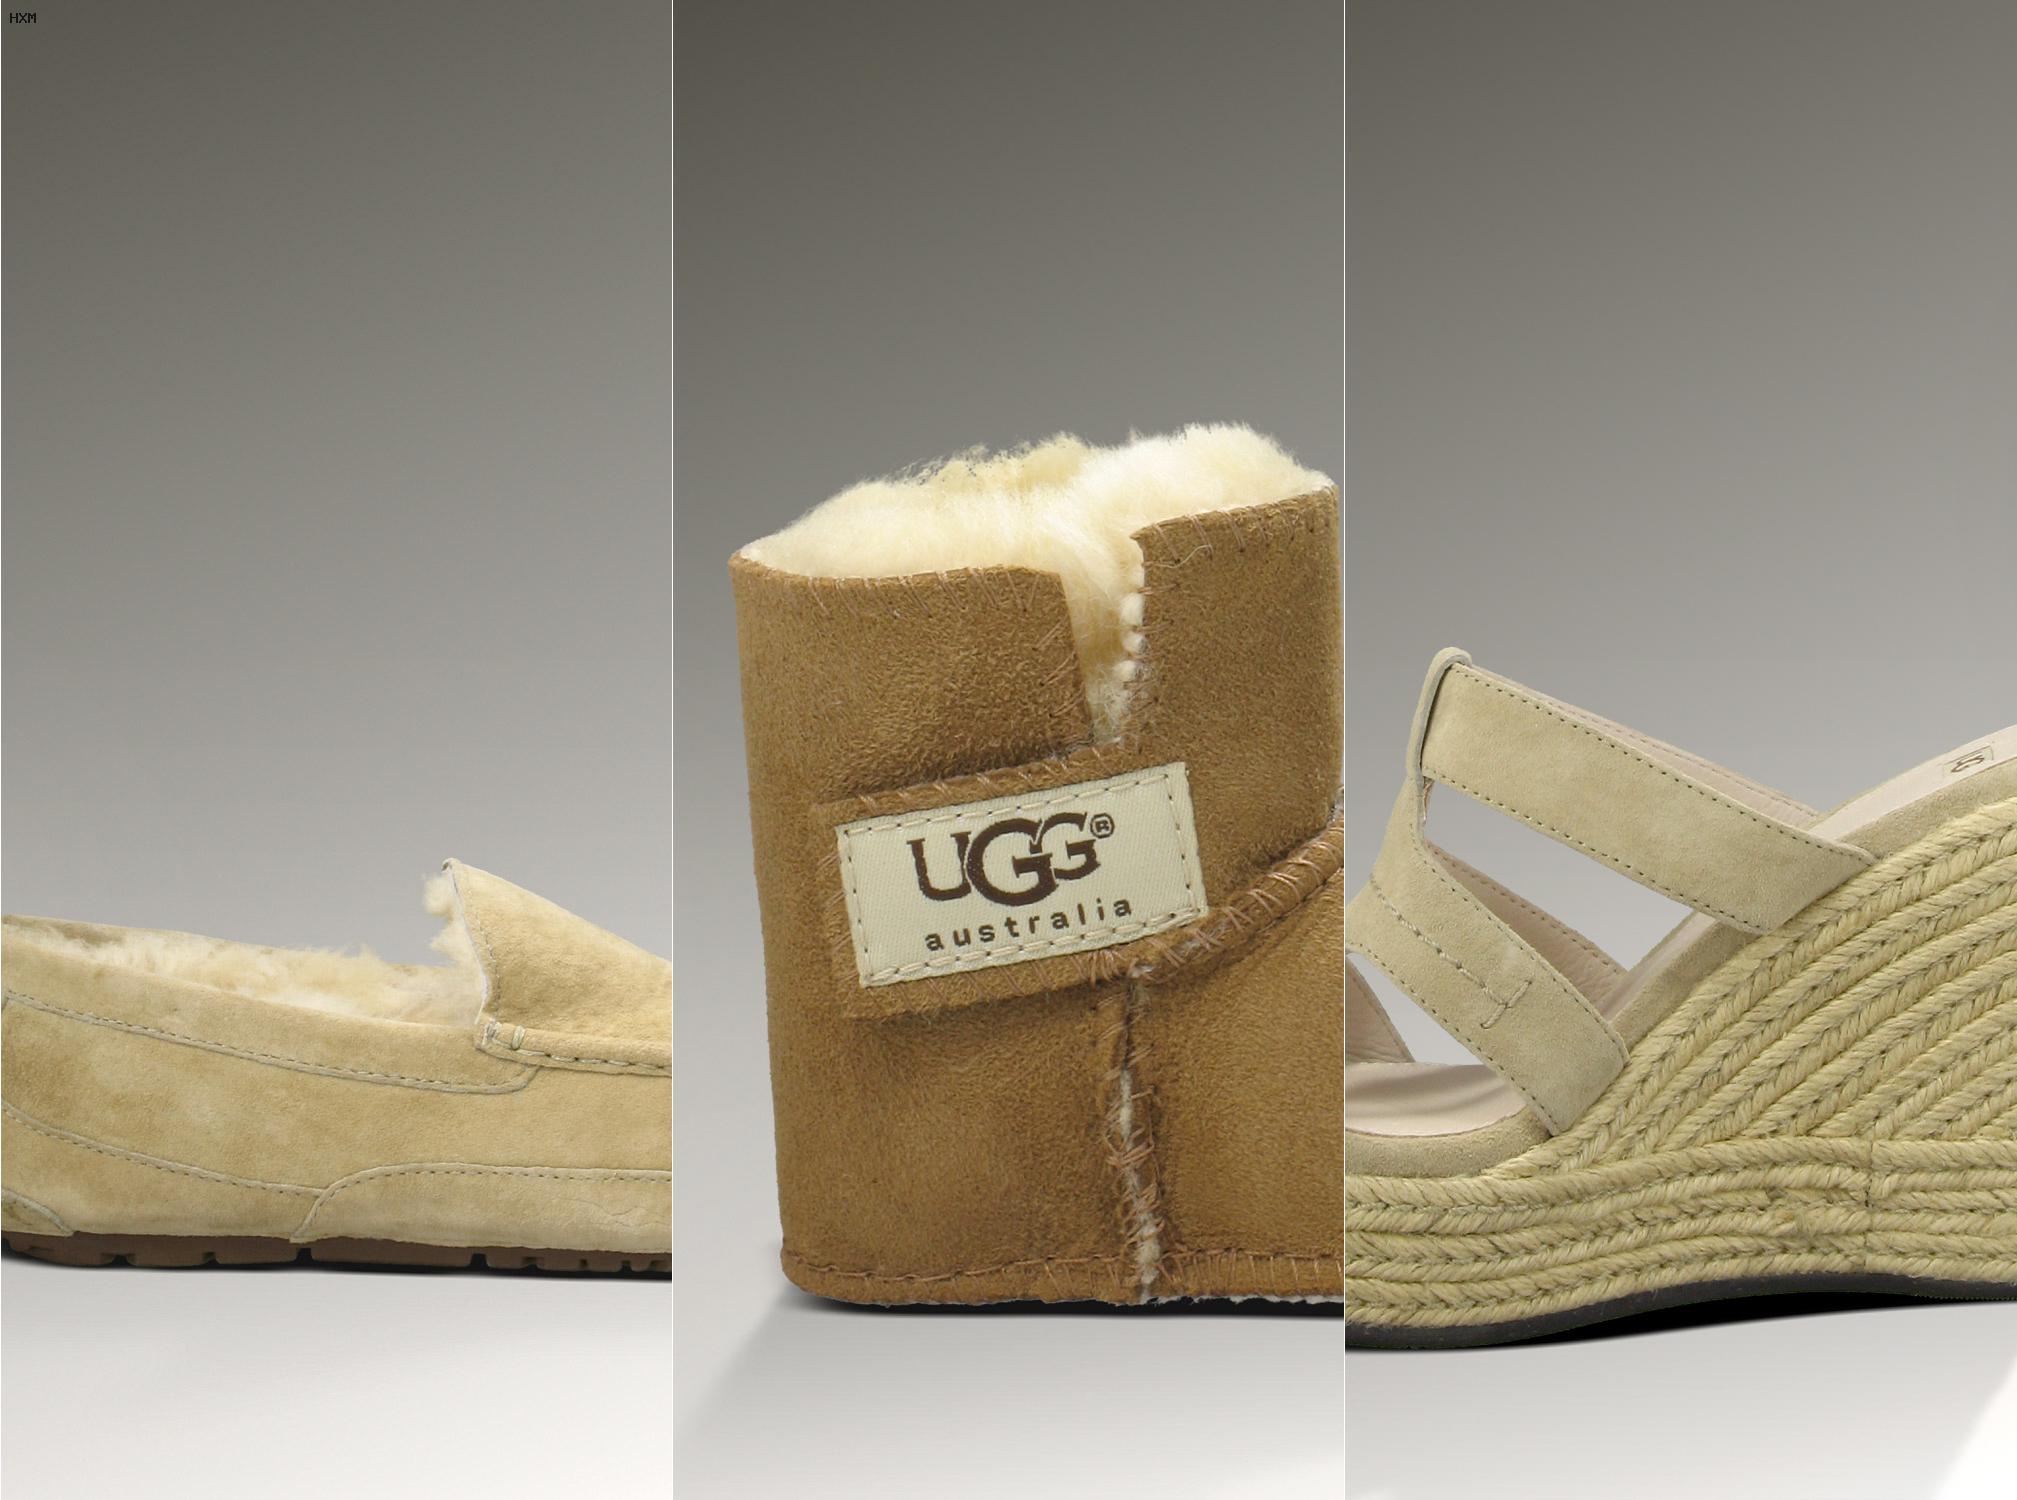 deckers ugg boots sale uk